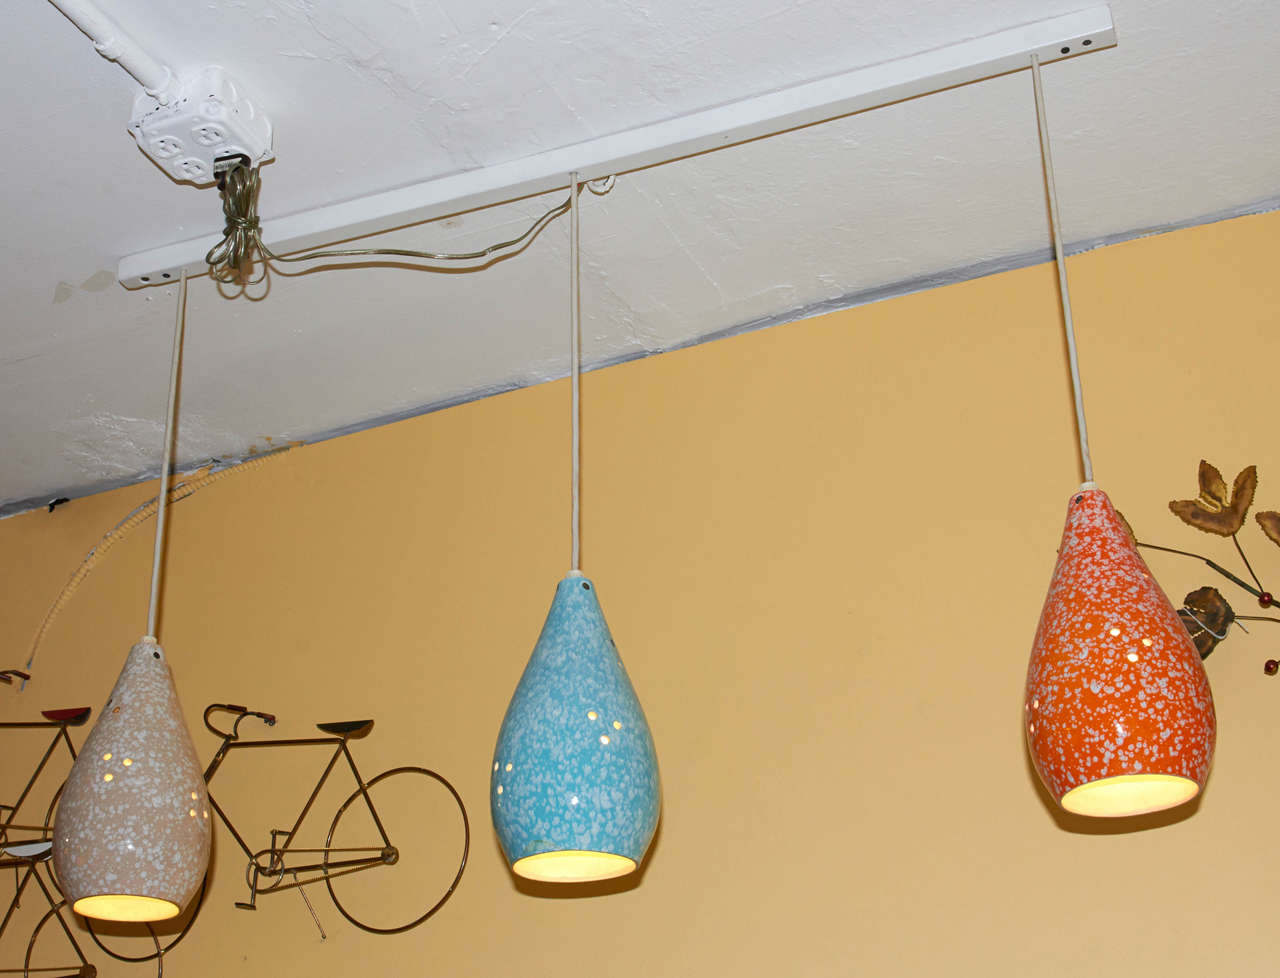 Set of three ceramic pendant lights finished in a colorful, speckled glaze. Each lamp has a graceful form and is pierced with small holes which add some sparkle. Very charming! Please contact for location. 